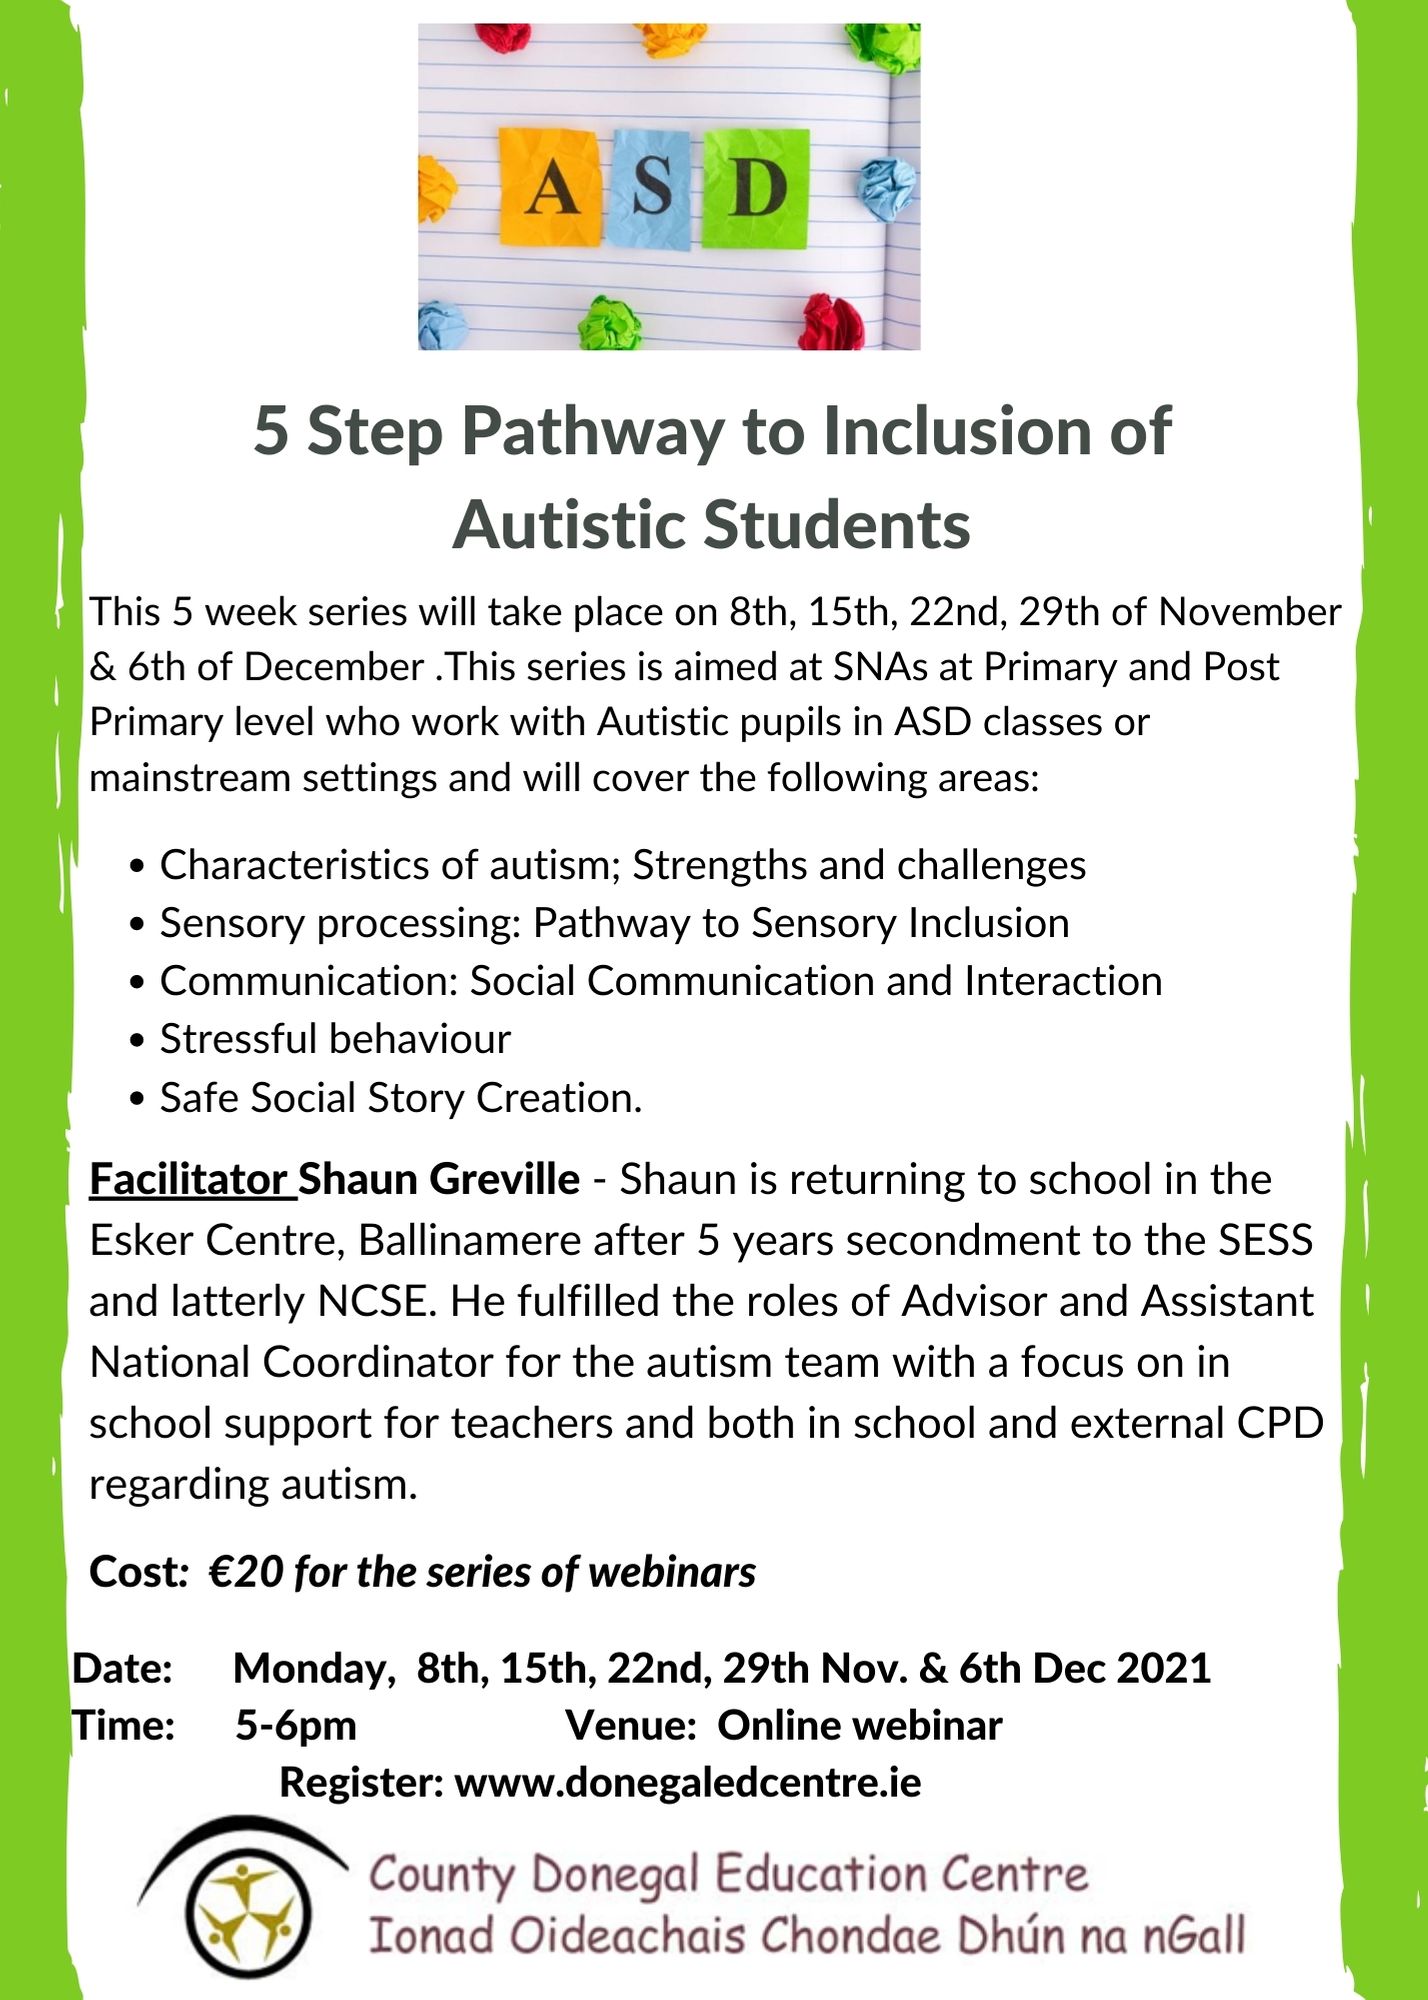 5_Step_Pathway_to_Inclusion_of_Autistic_Students_2.jpg